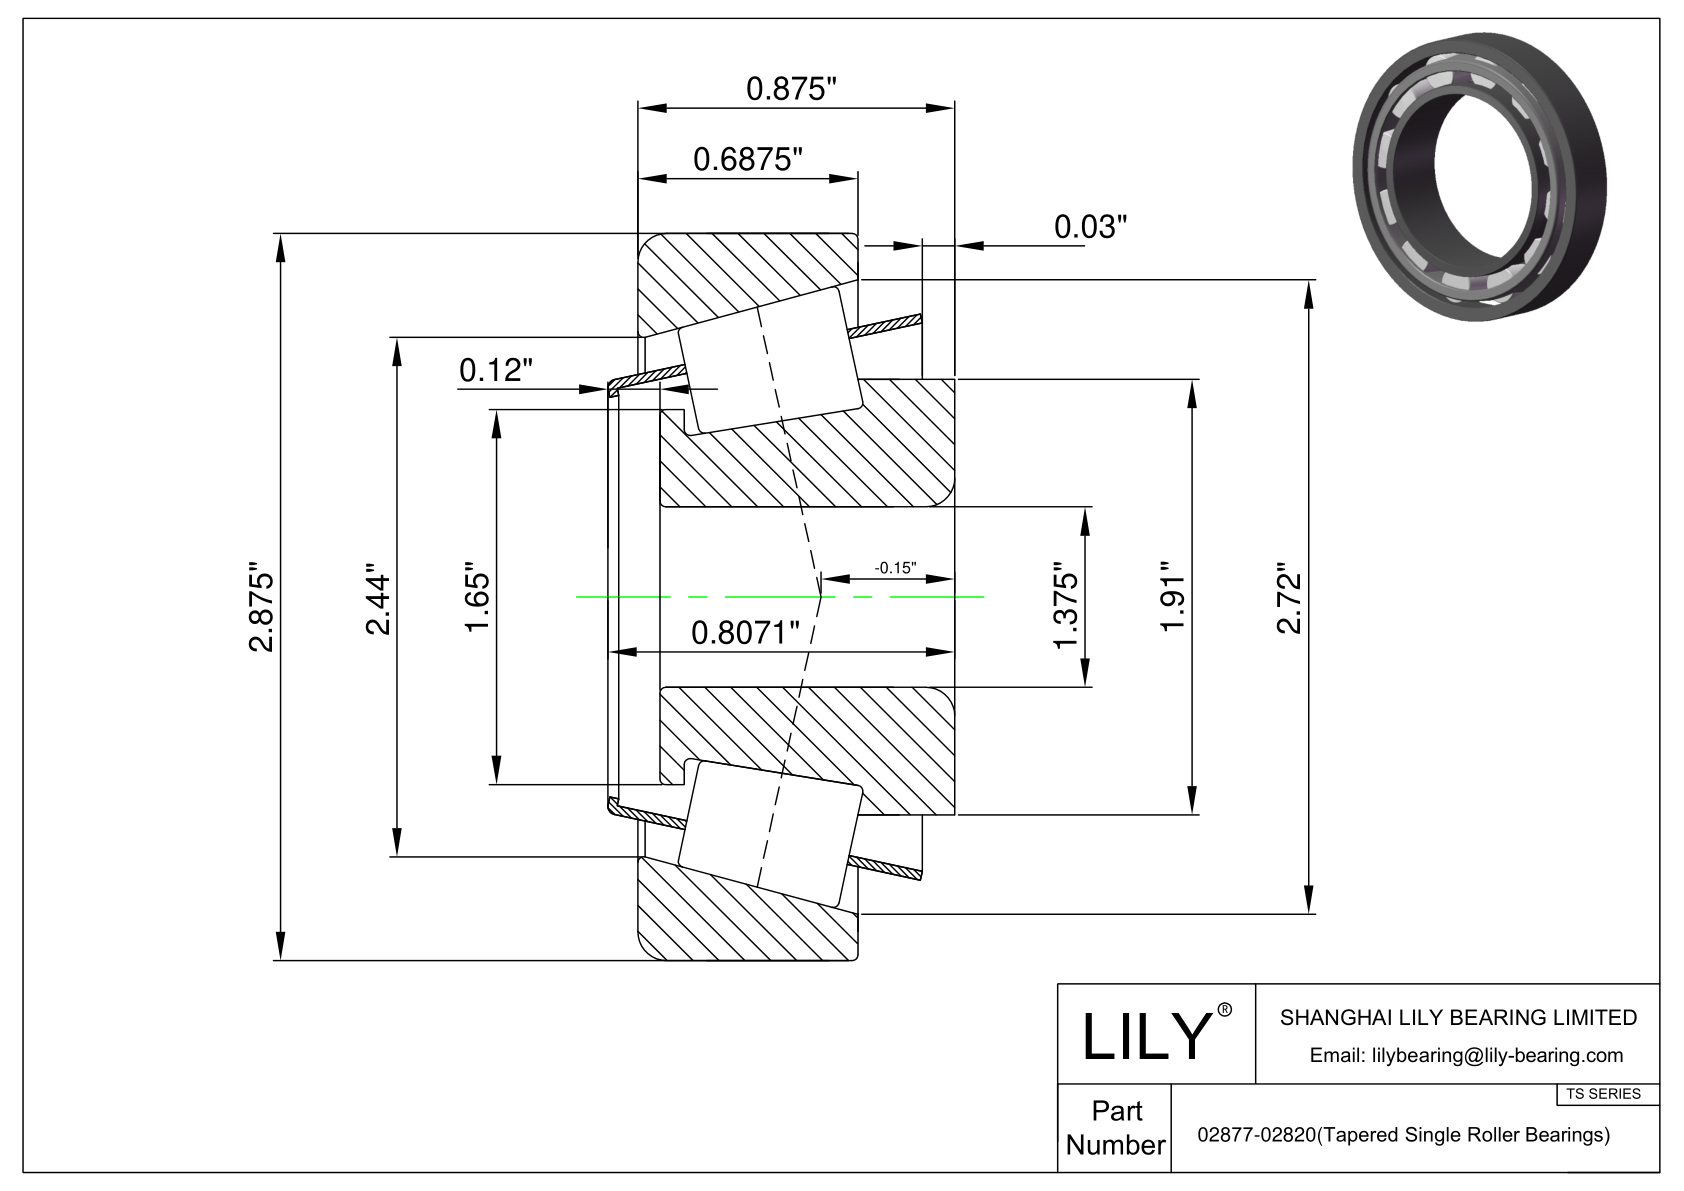 02877-02820 TS (Tapered Single Roller Bearings) (Imperial) cad drawing